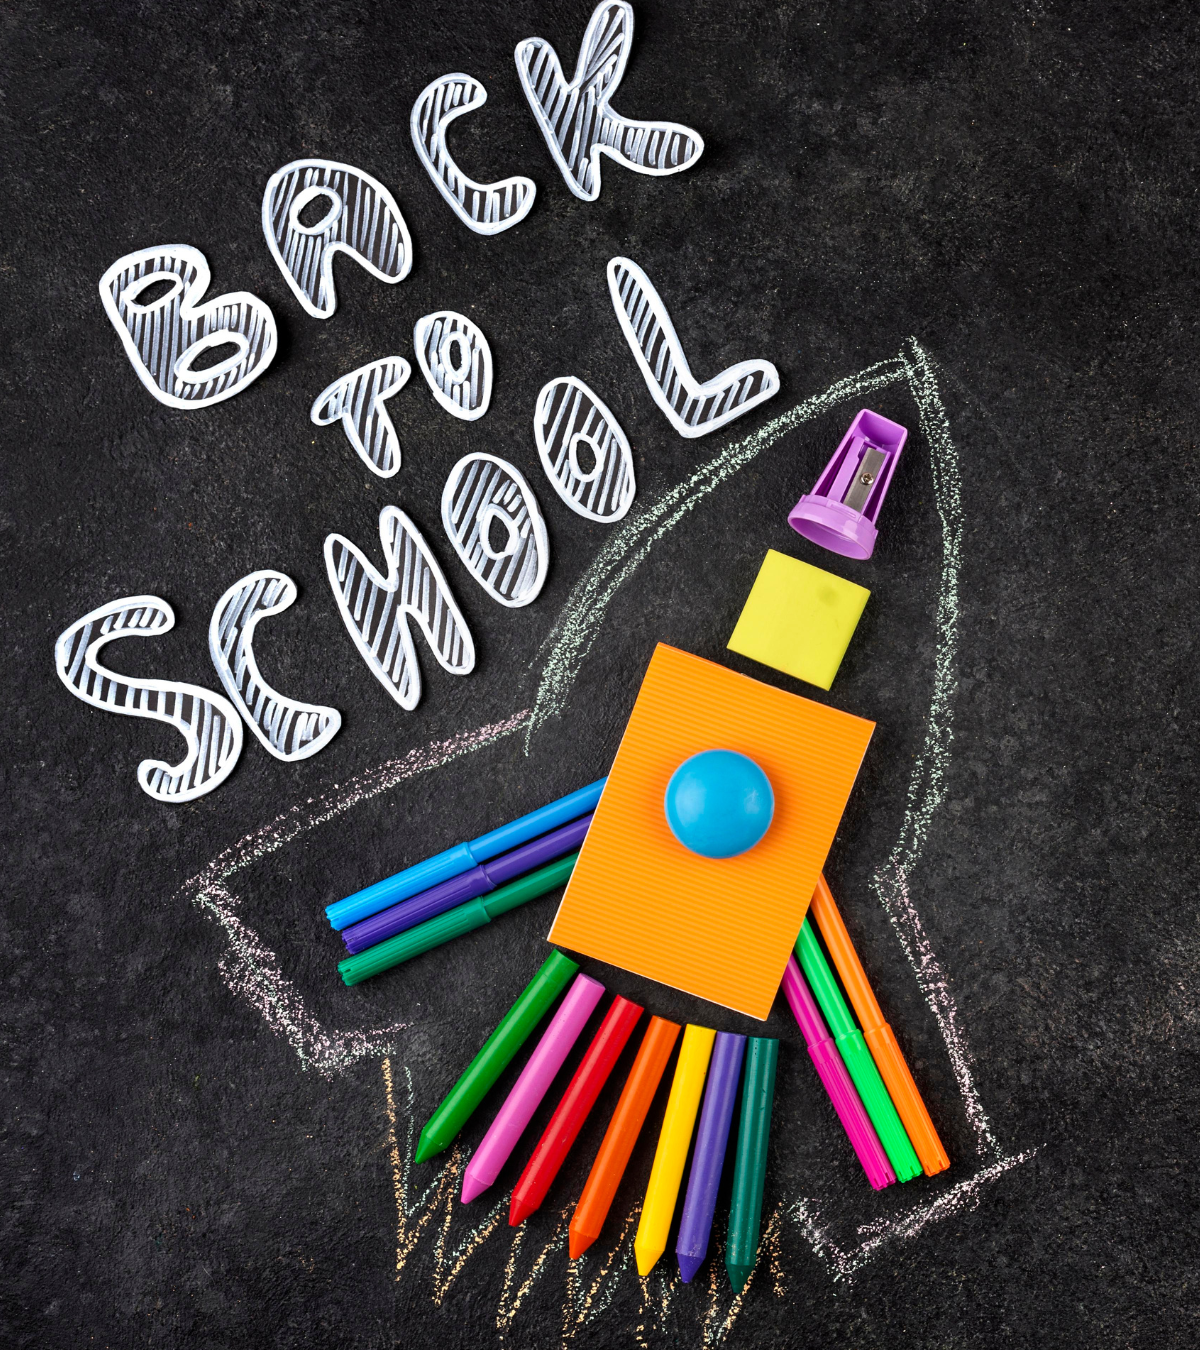 Blackboard background with school supplies in shape of rocket ship. Text: Back to school.